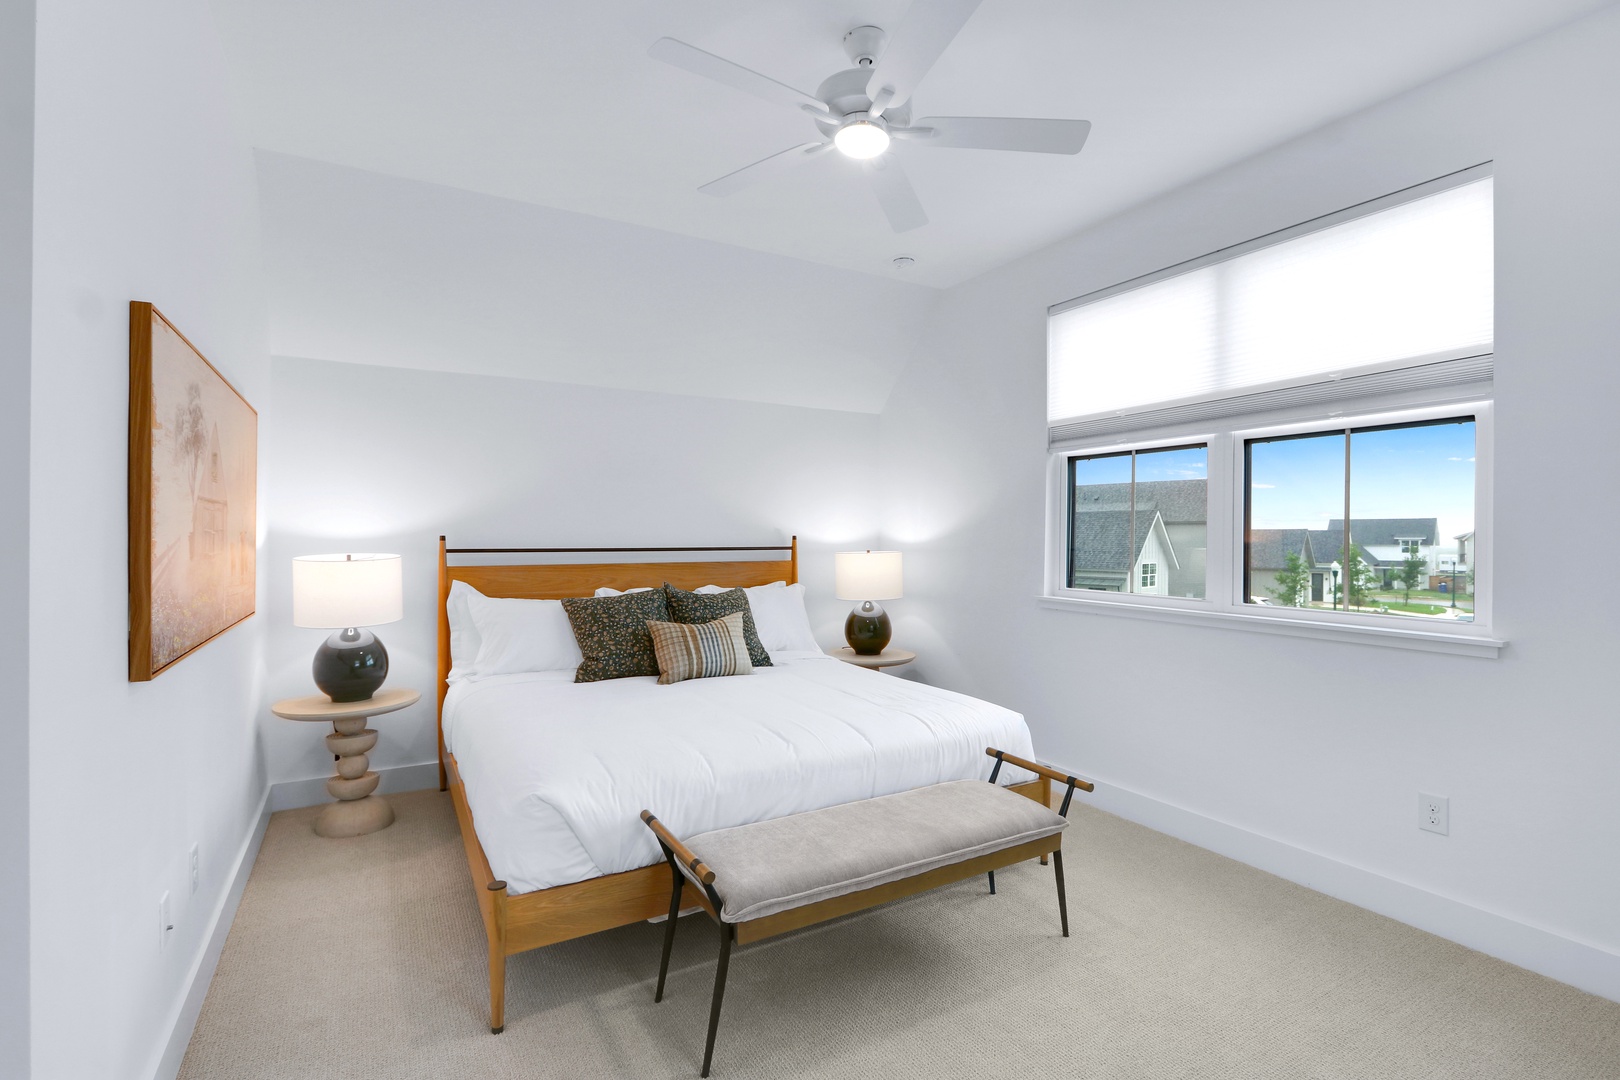 A plush king bed, Smart TV, & ensuite await in this serene 2nd-floor suite